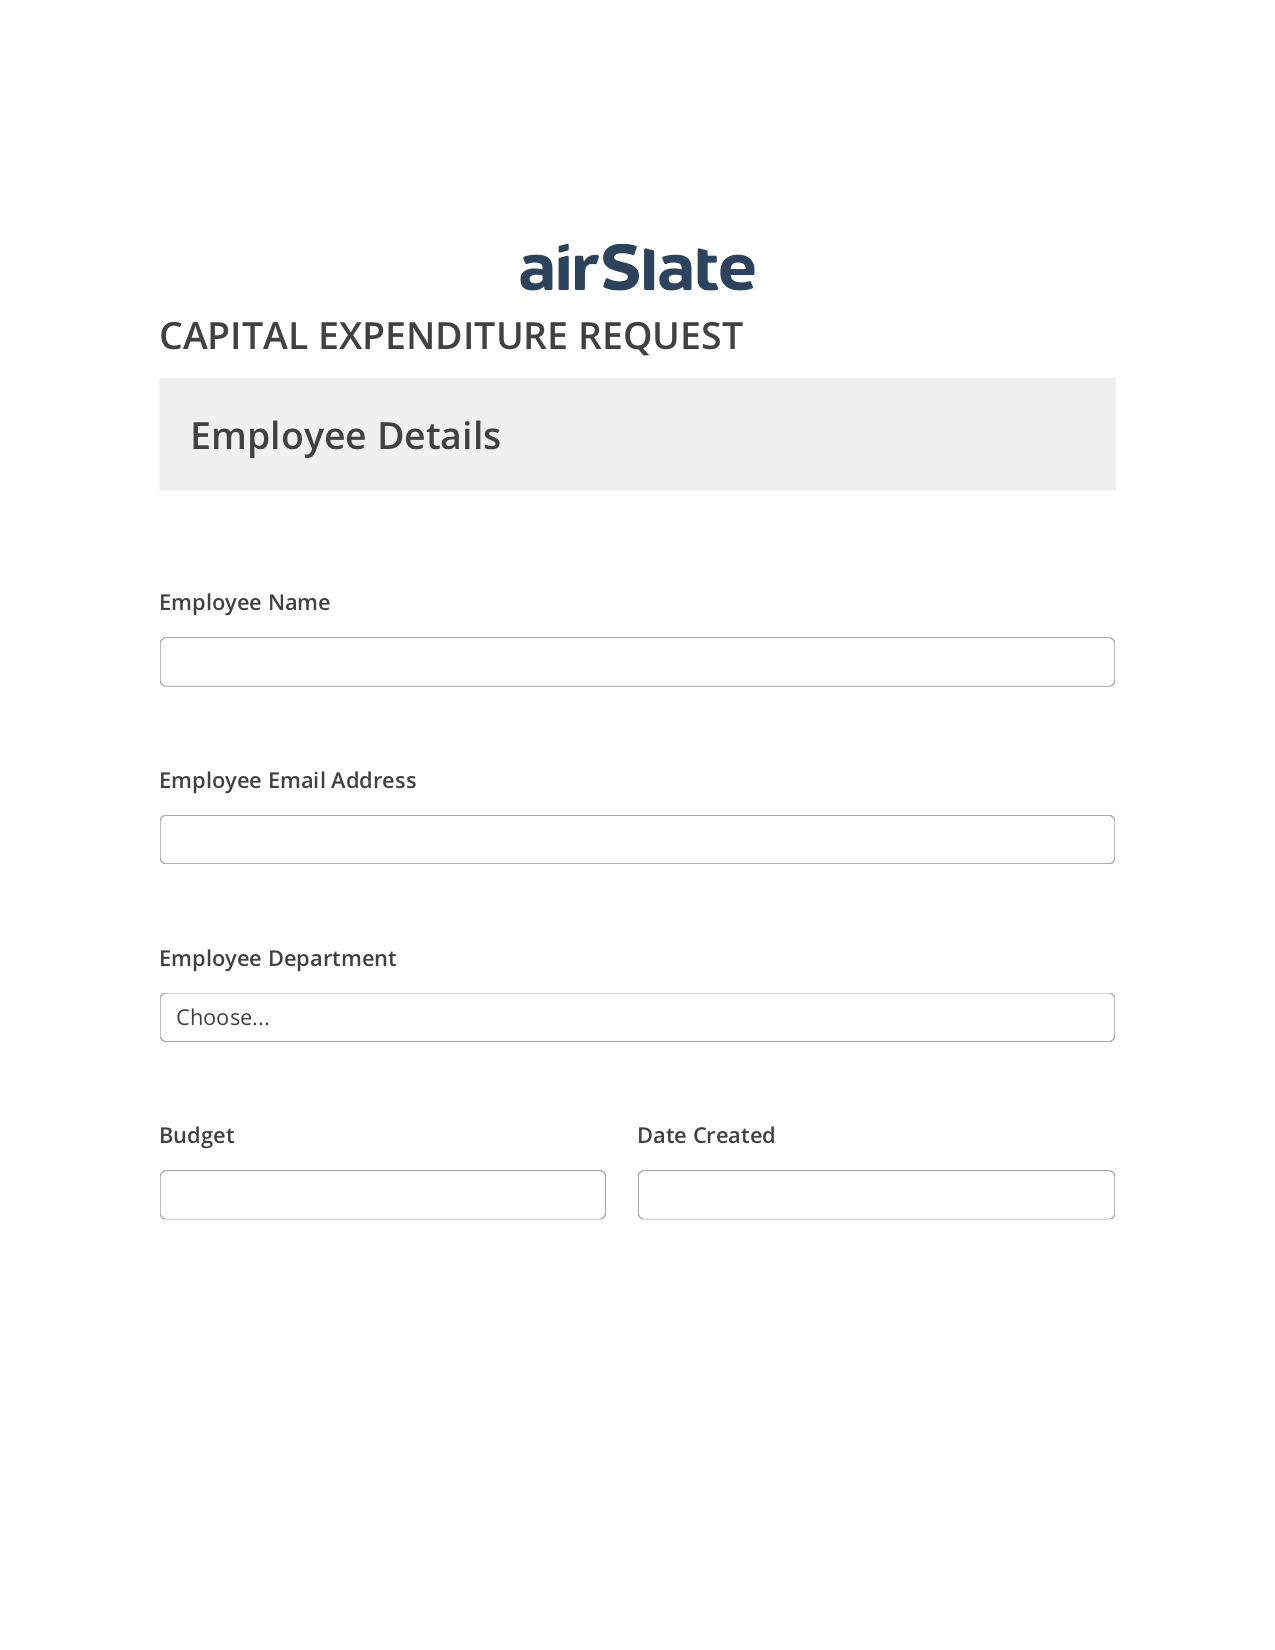 Capital Expenditure Request Approval Workflow Pre-fill from Salesforce Records with SOQL Bot, Remove Slate Bot, Export to NetSuite